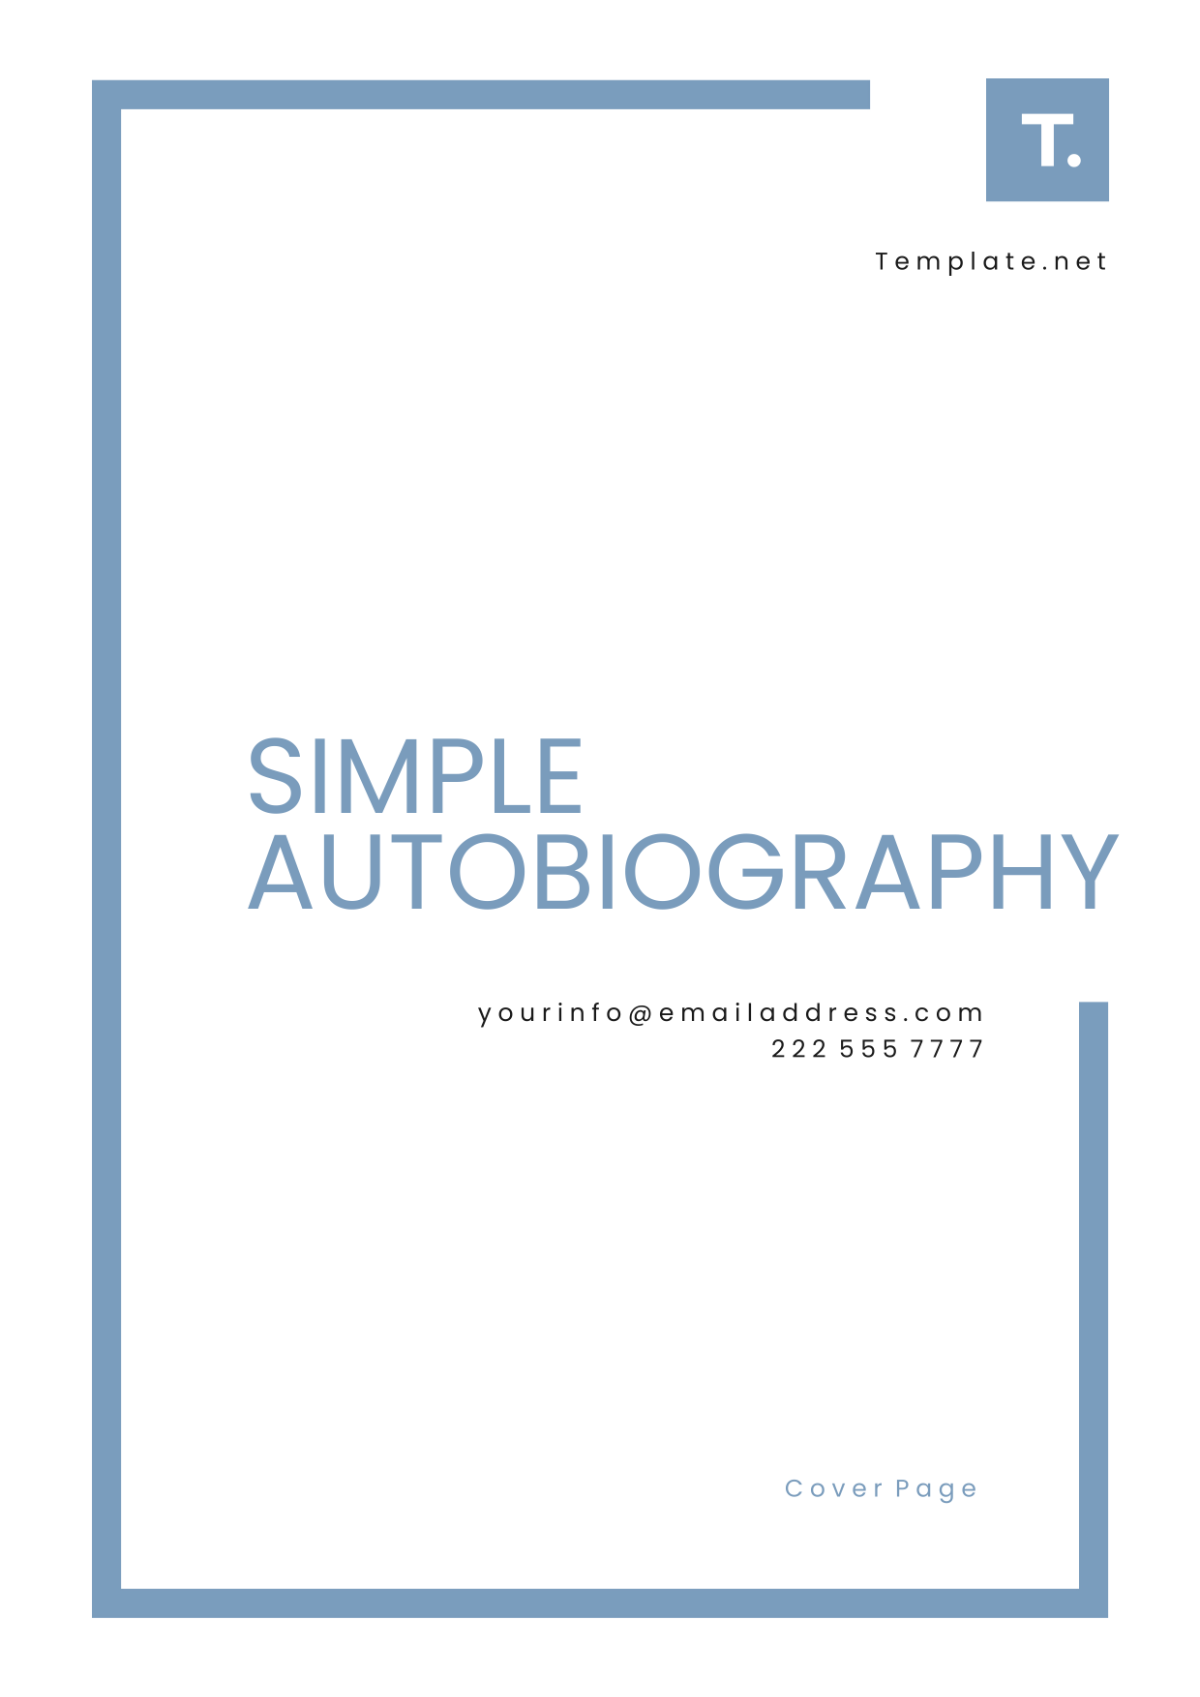 Simple Autobiography Cover Page